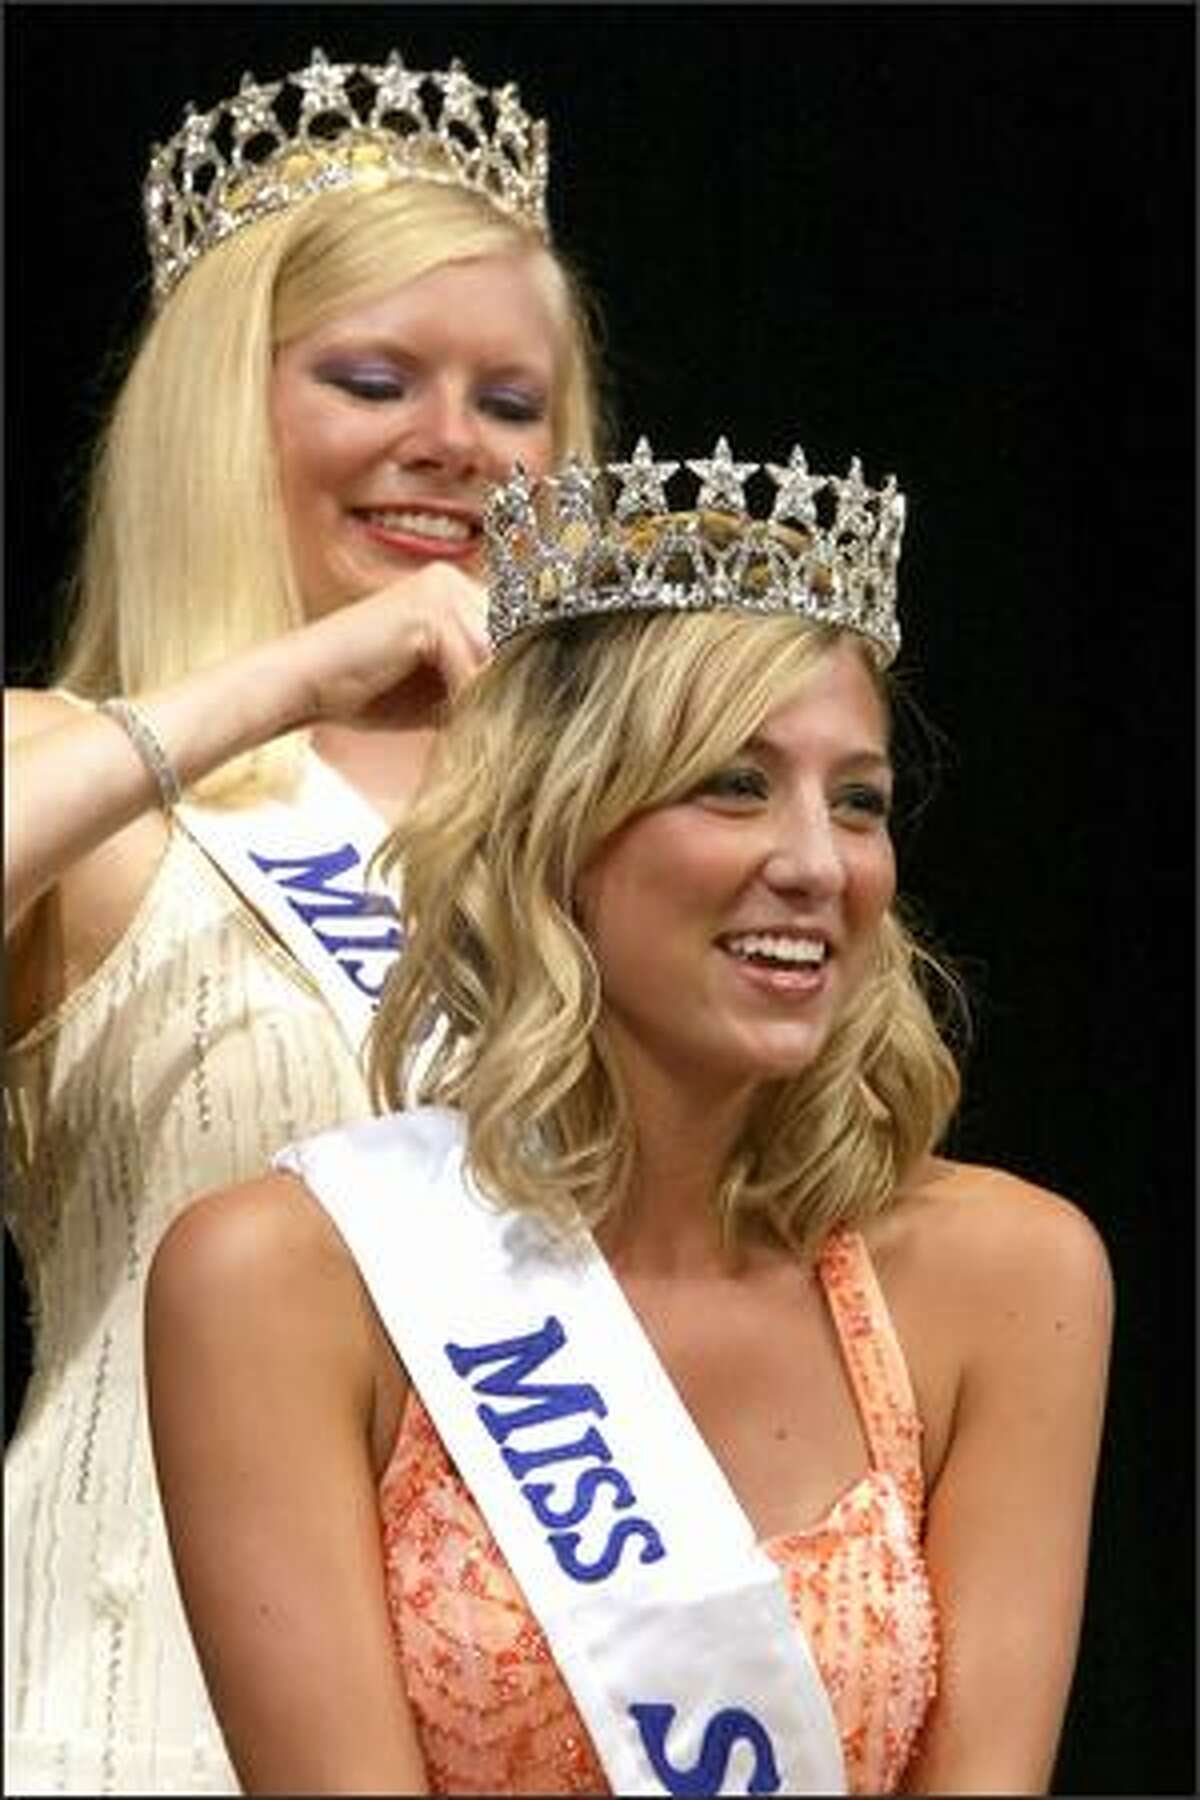 New Miss Seafair Erin Waid, front, is all smiles as she is crowned by former Seafair Queen Melissa Parks during the Coronation Tuesday in Seattle.